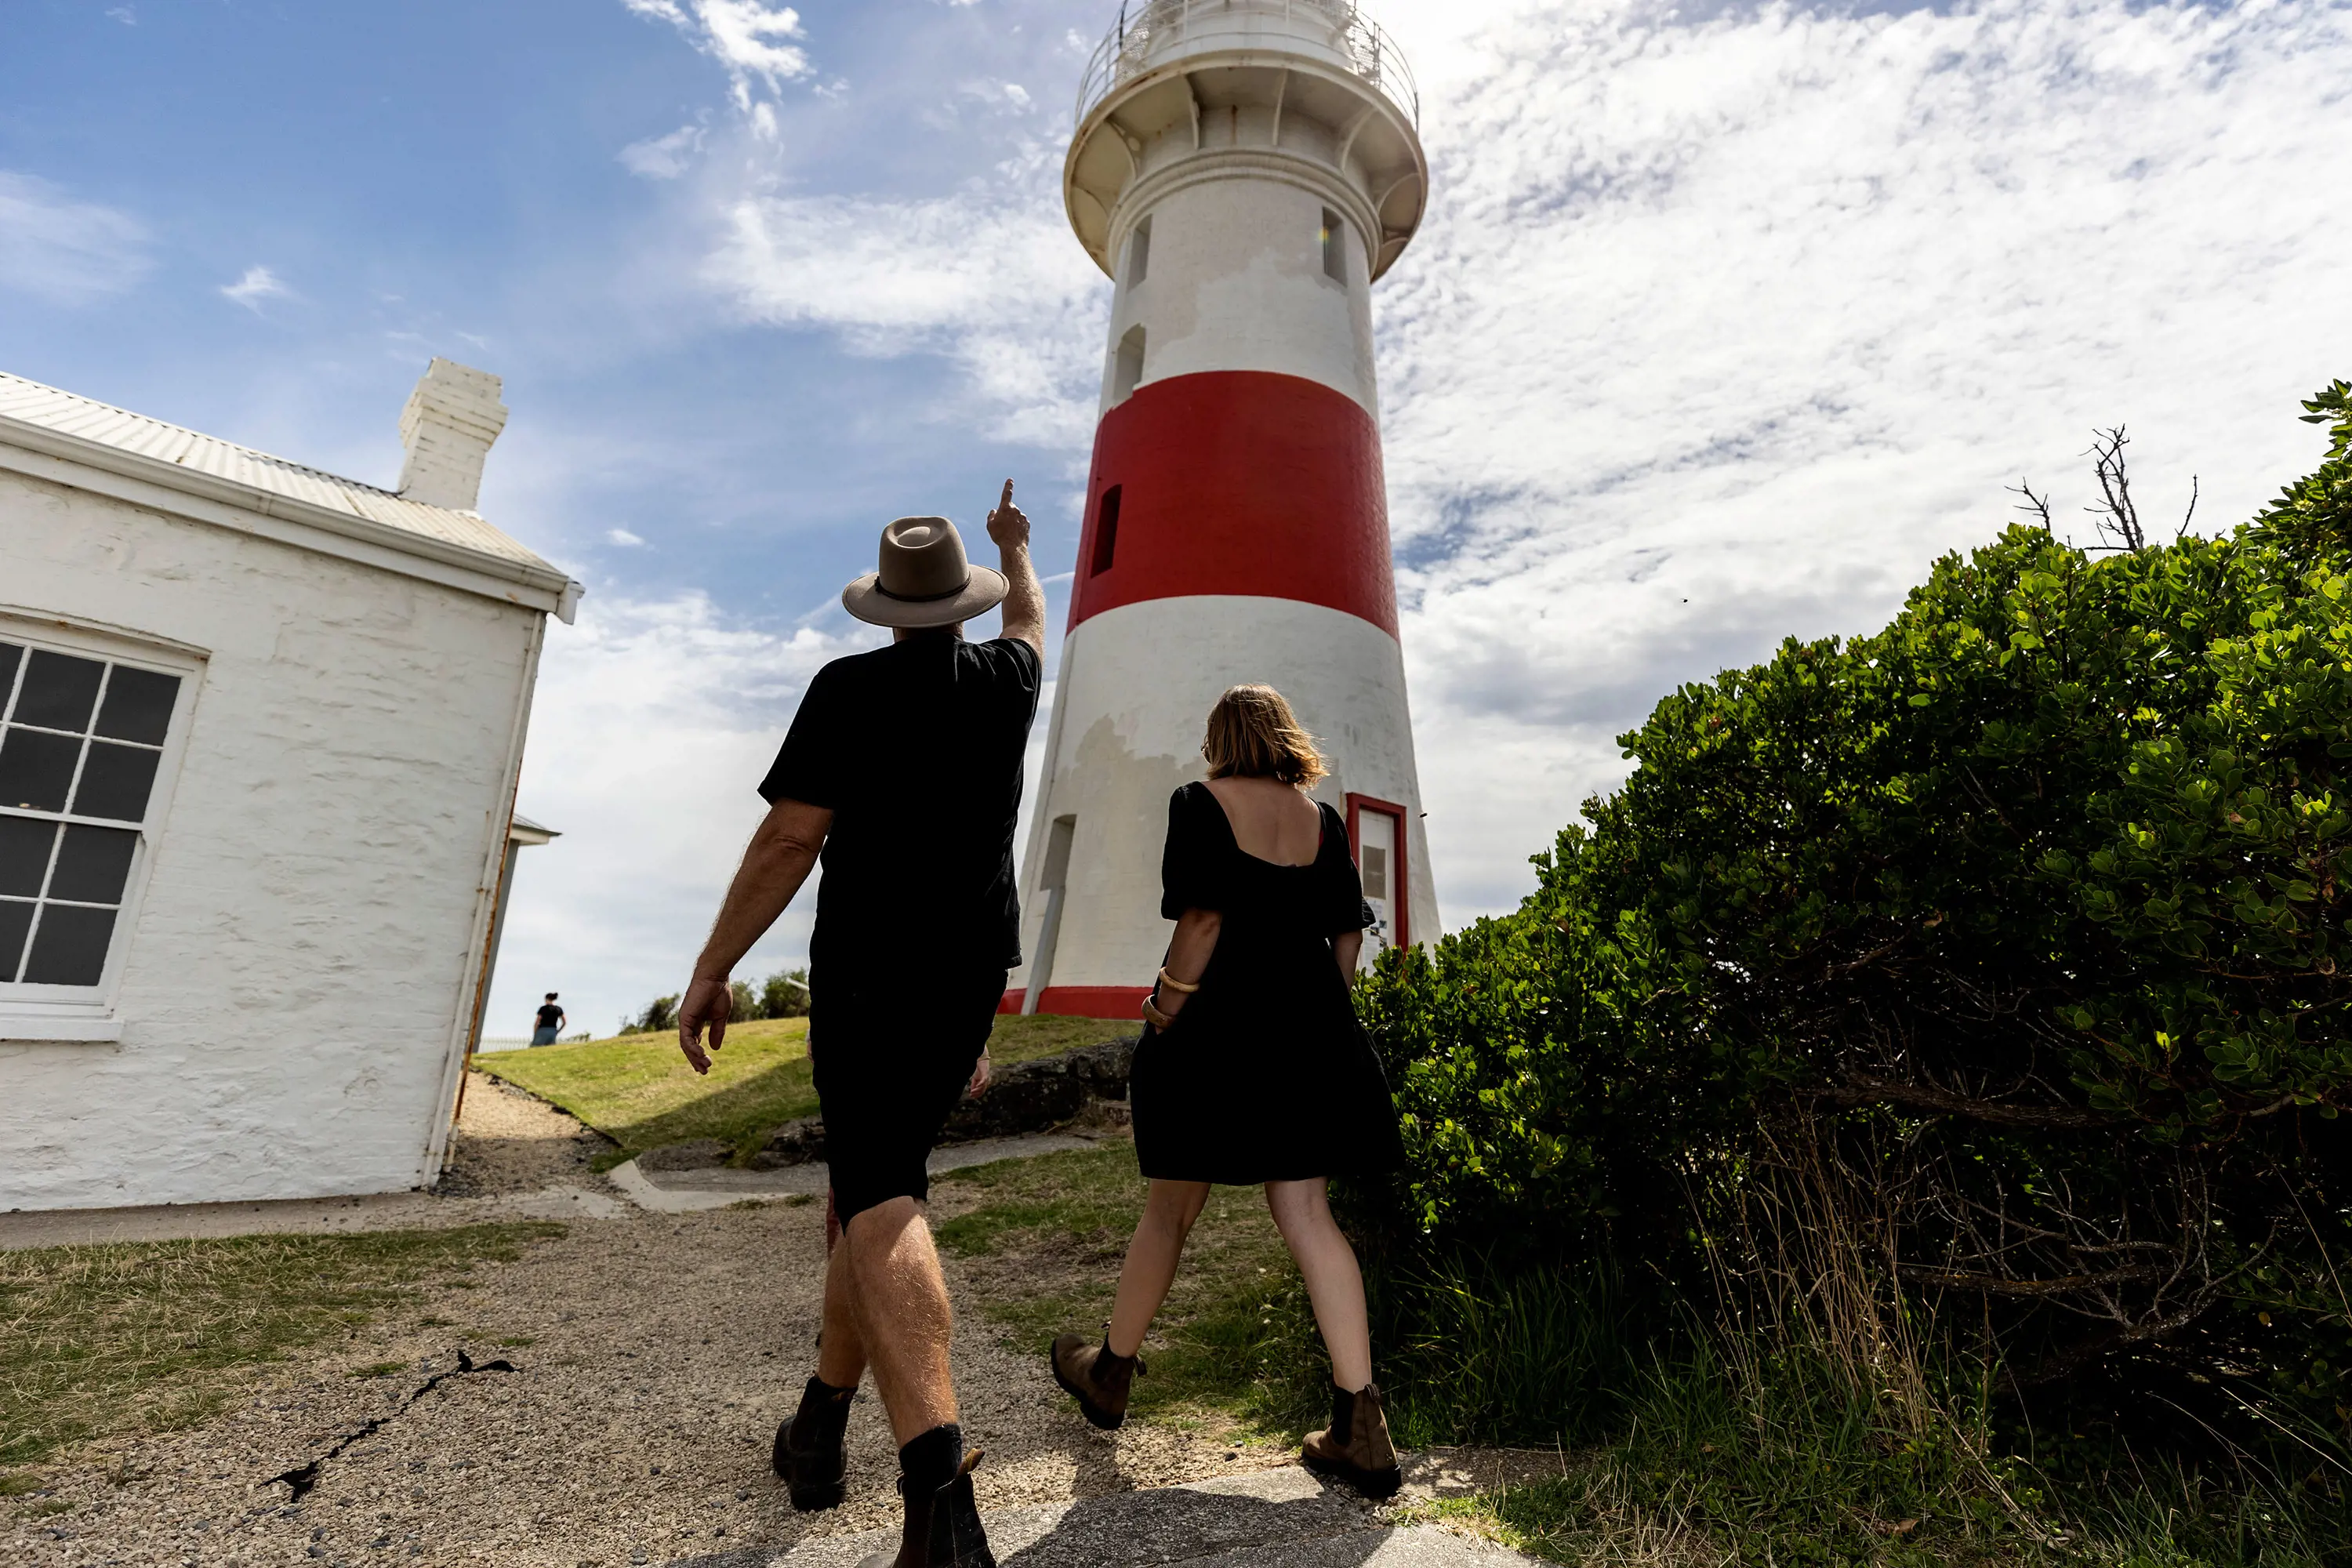 A guide and a tourist walk along a gravel path below a tall, red and white lighthouse.